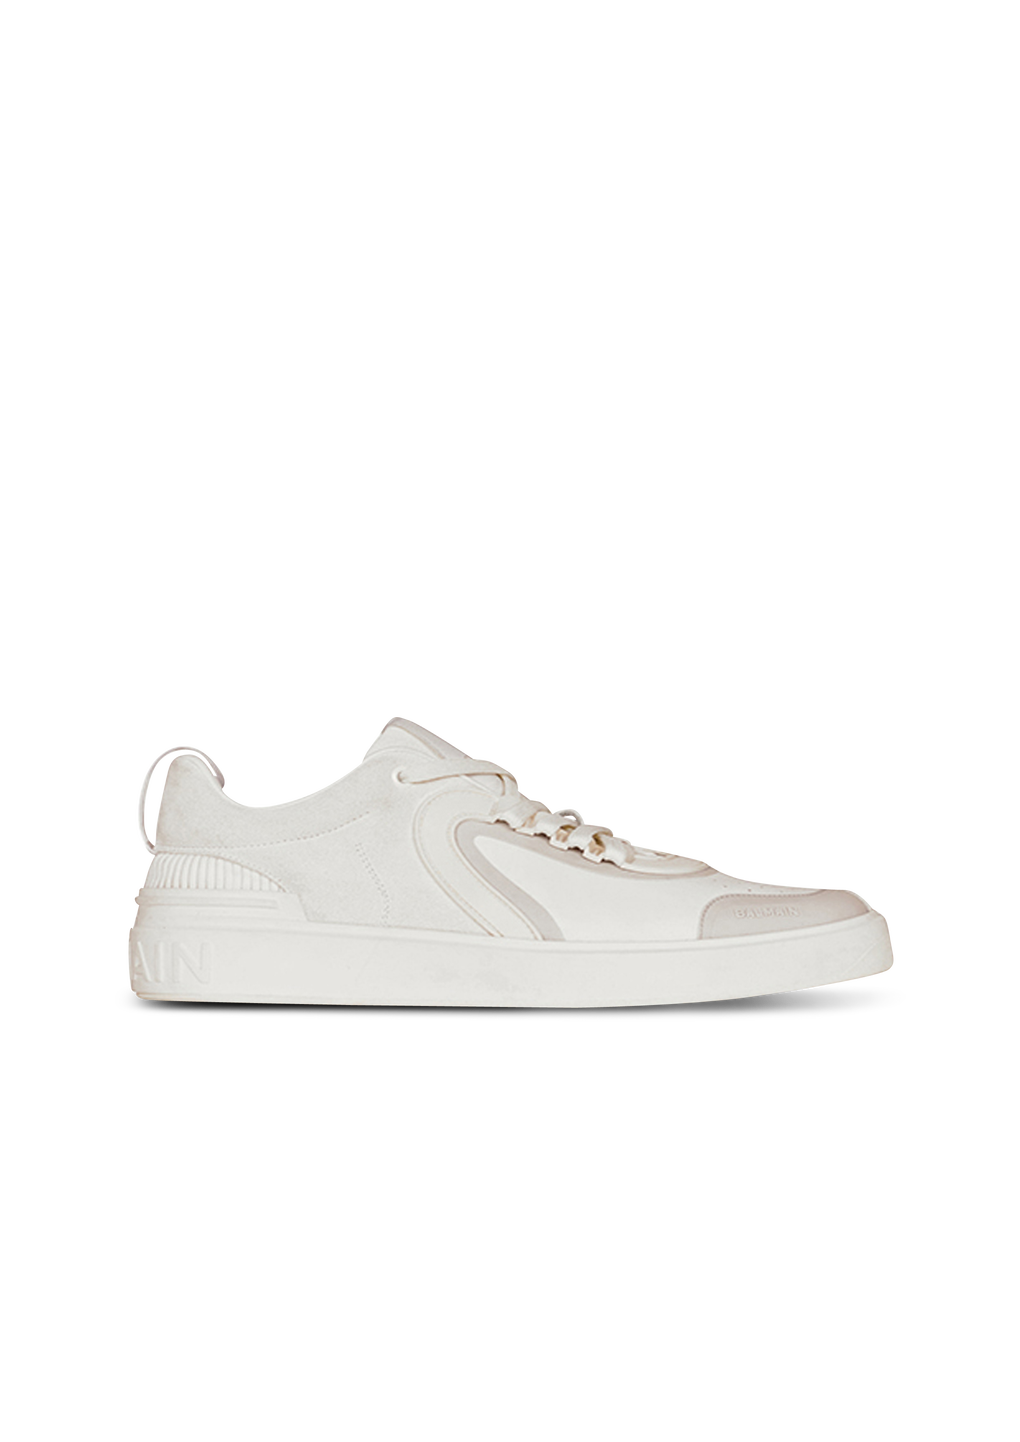 Leather and suede B-Skate sneakers, white, hi-res